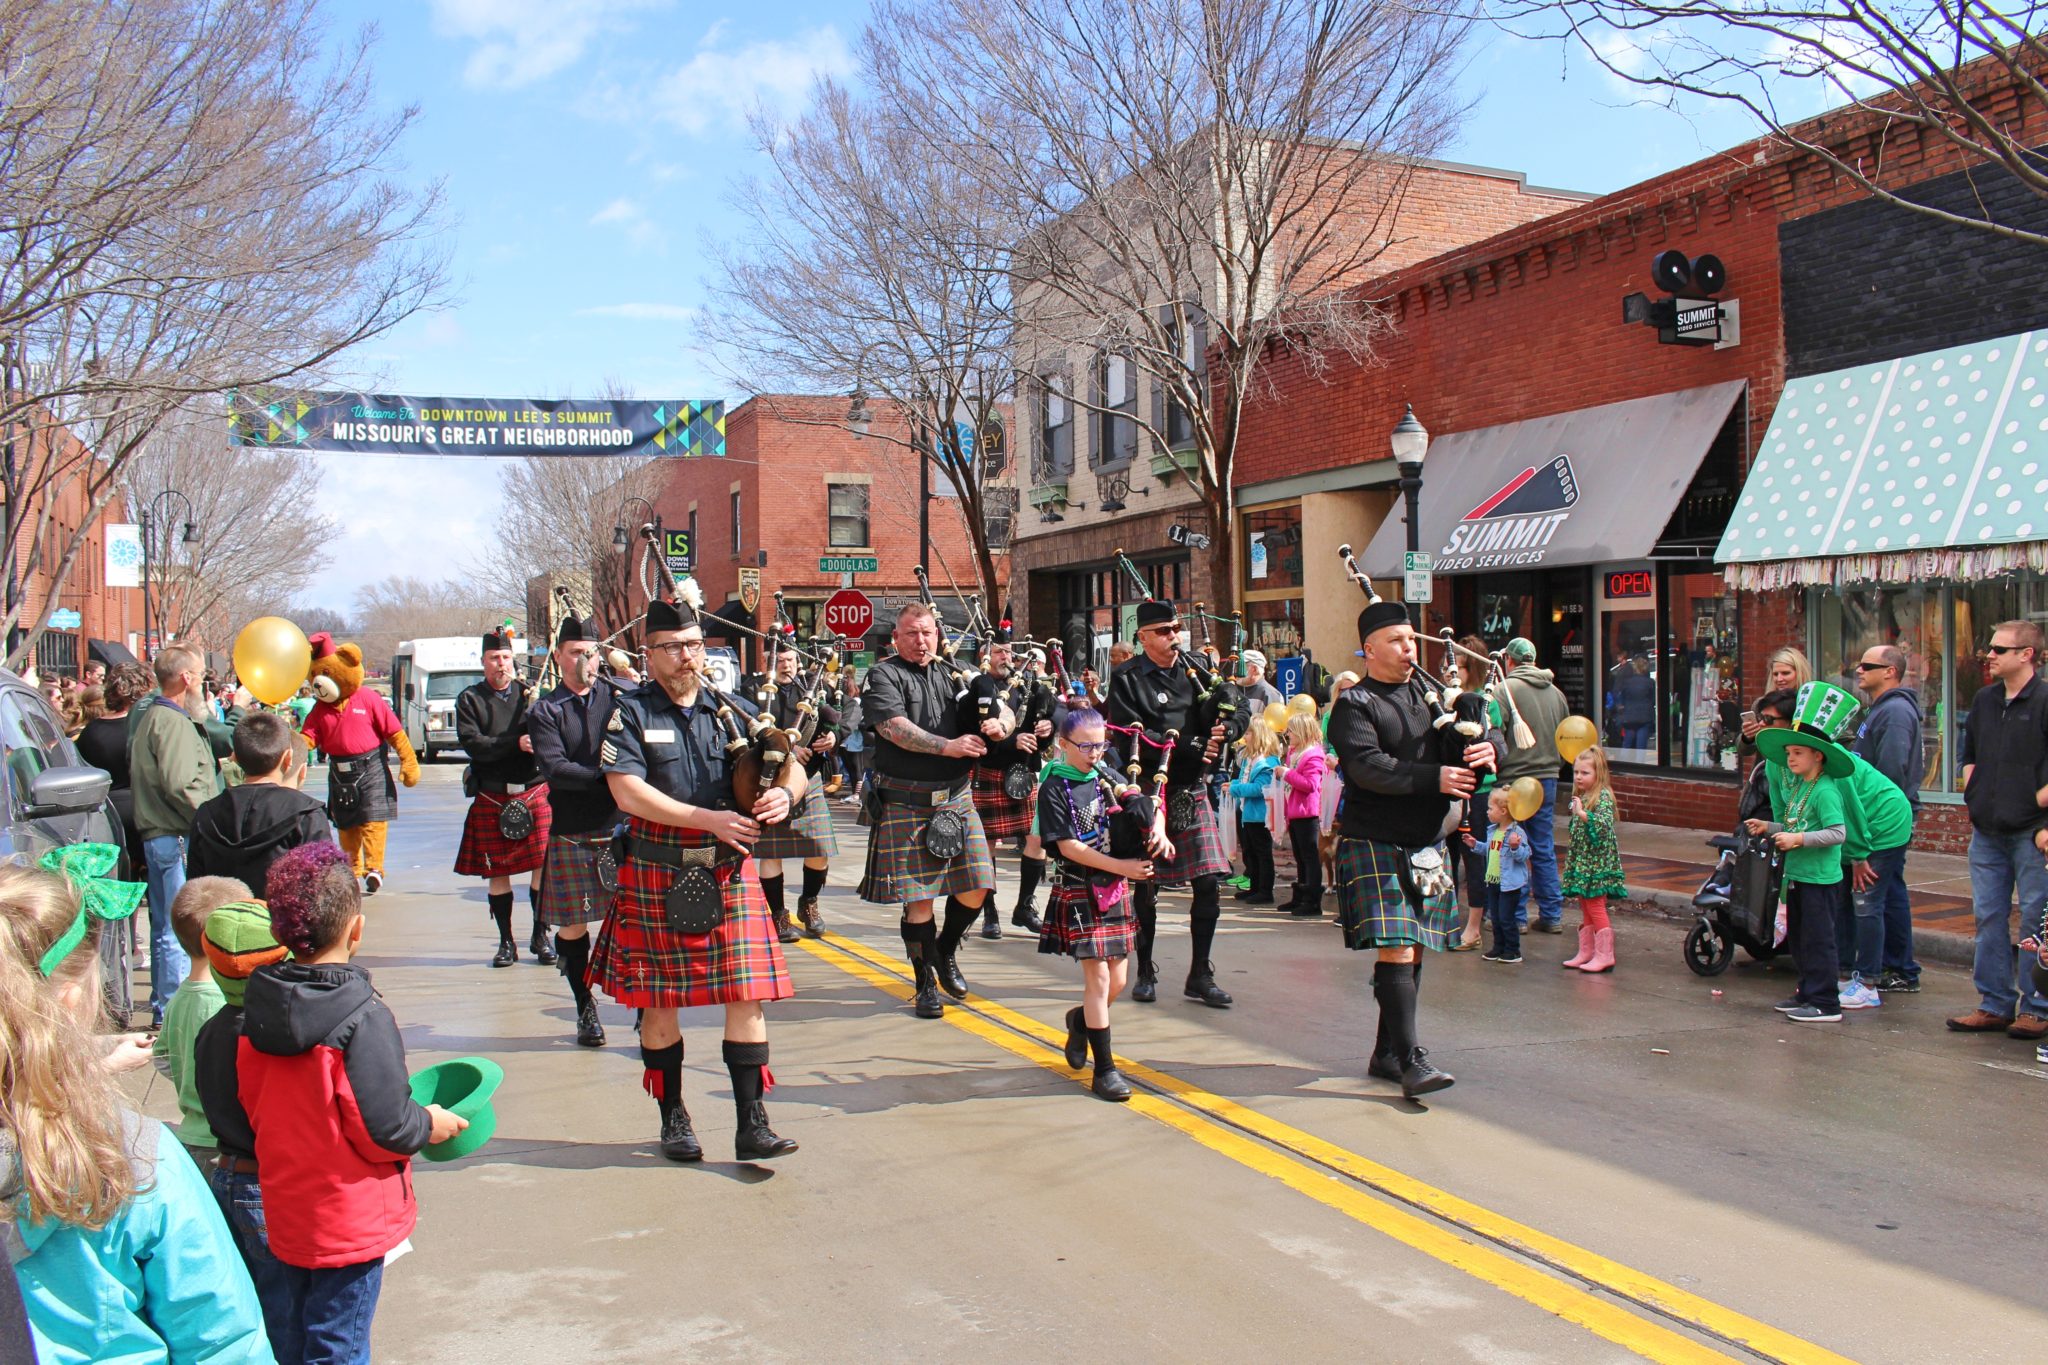 Emerald Isle Parade will float through Downtown Lee’s Summit on March